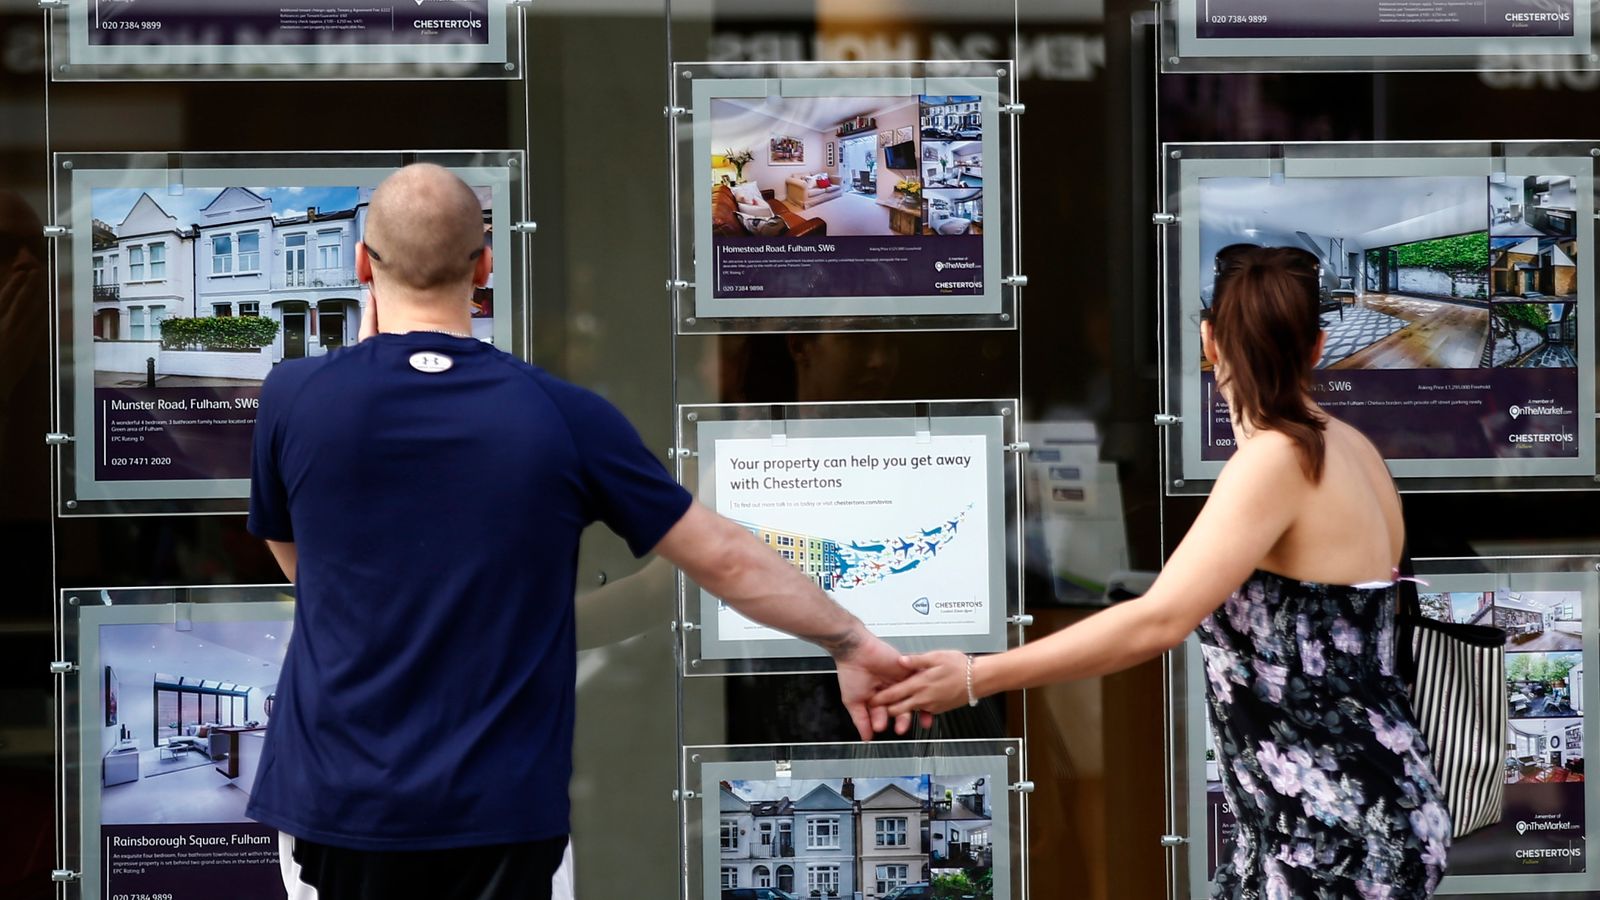 'Storm clouds gathering' for property market as house prices fall